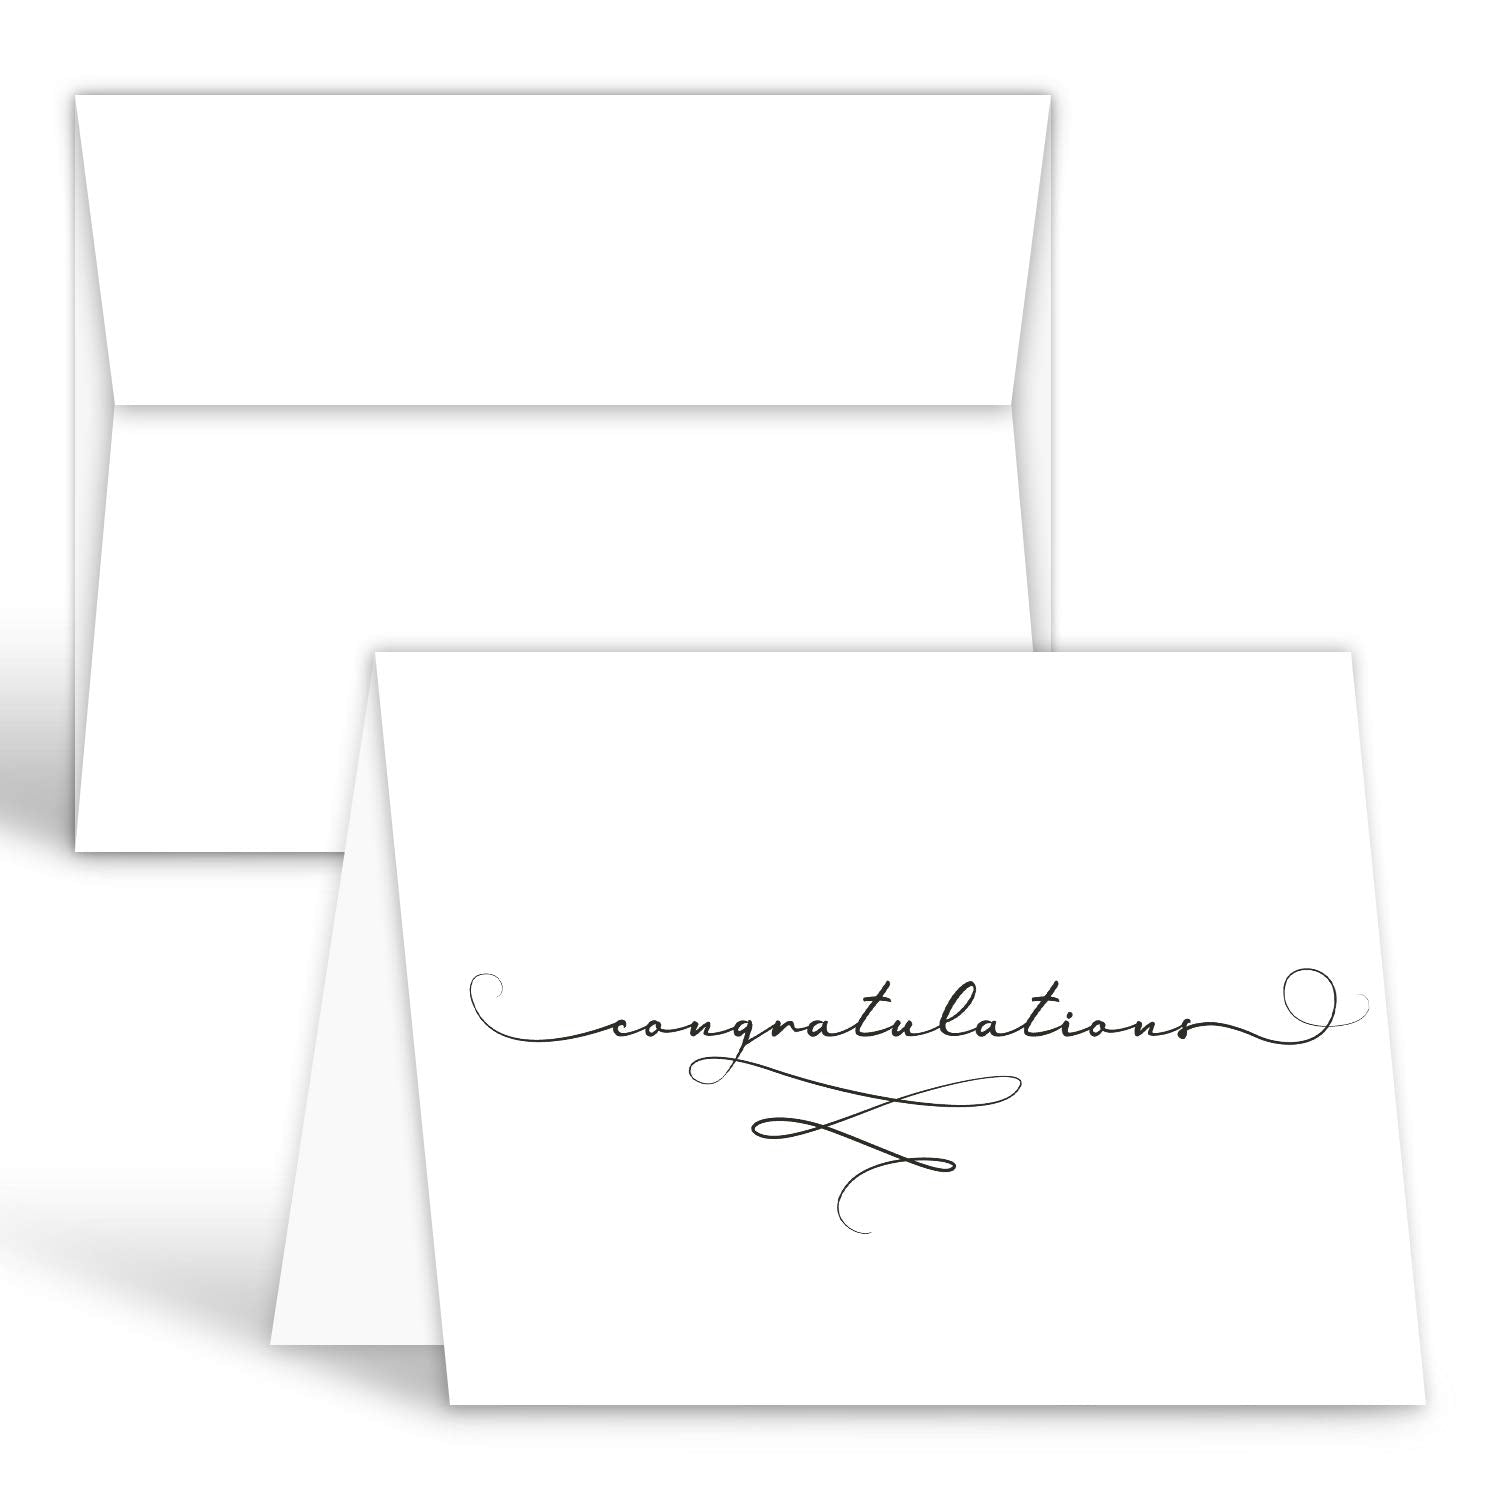 Congratulations' Greeting Cards with Envelopes